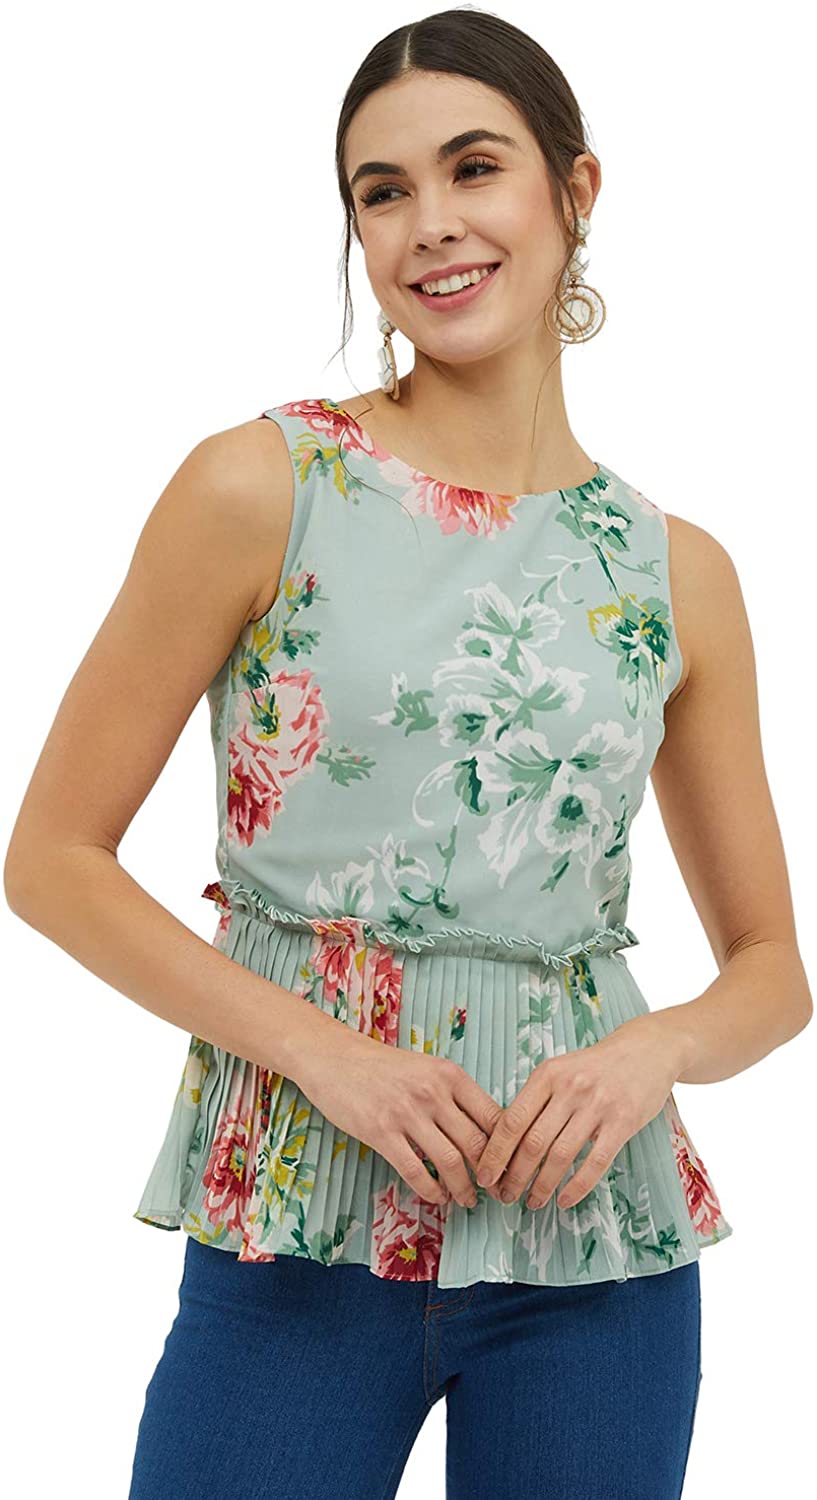 Floral Top With Pleats